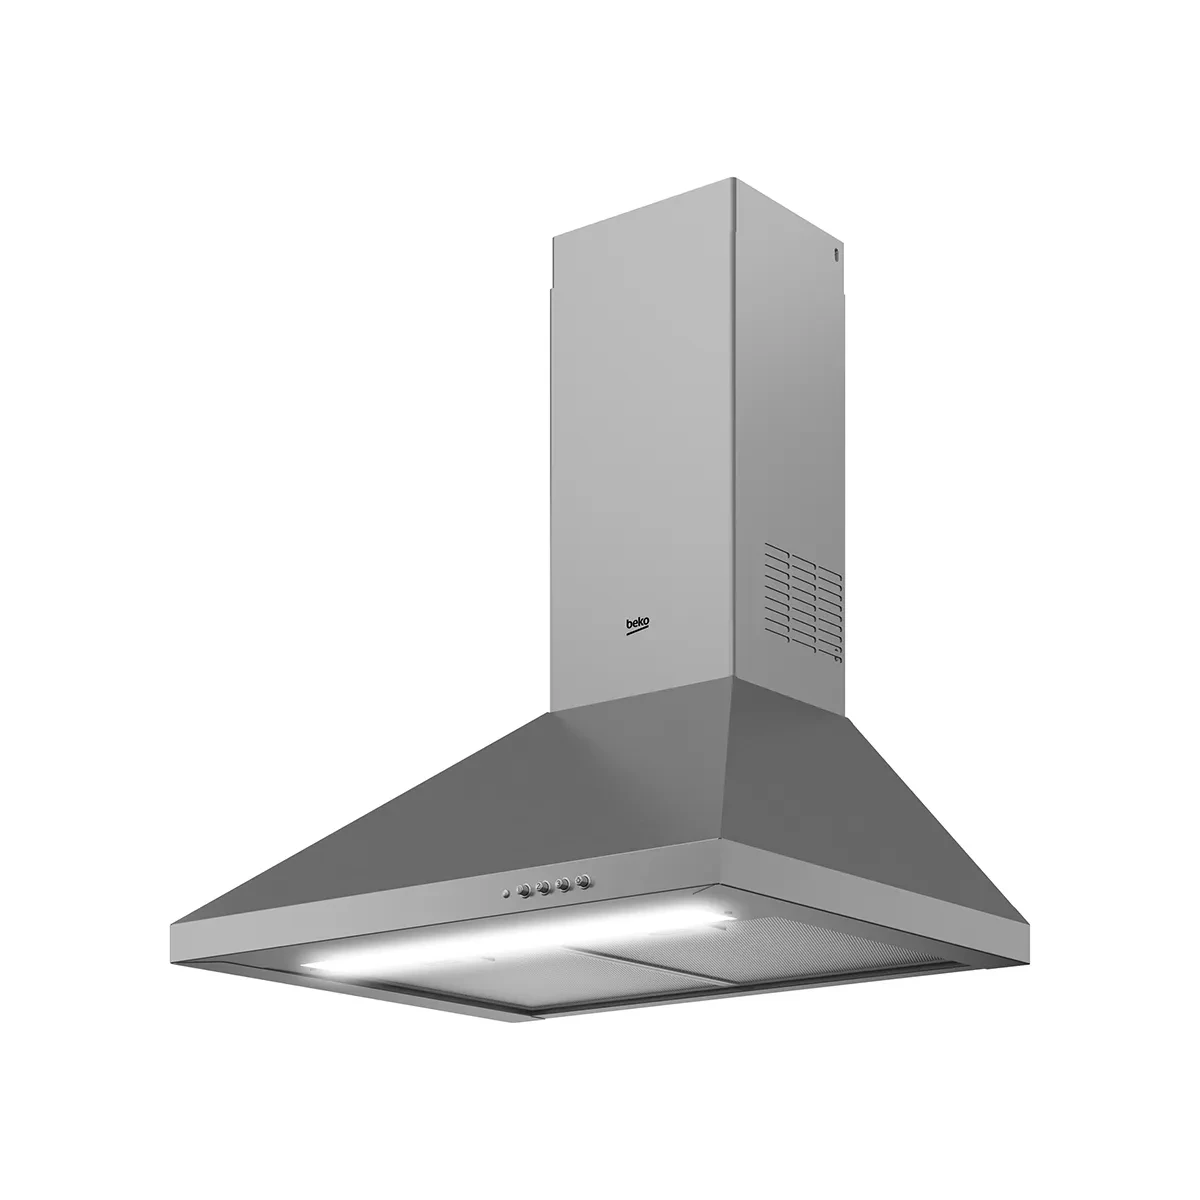 Beko pyramid -Hood 60cm - inox-2Grease Filters - Dishwasher Safe Filter-2 Carbon Filters- 3 speed levels